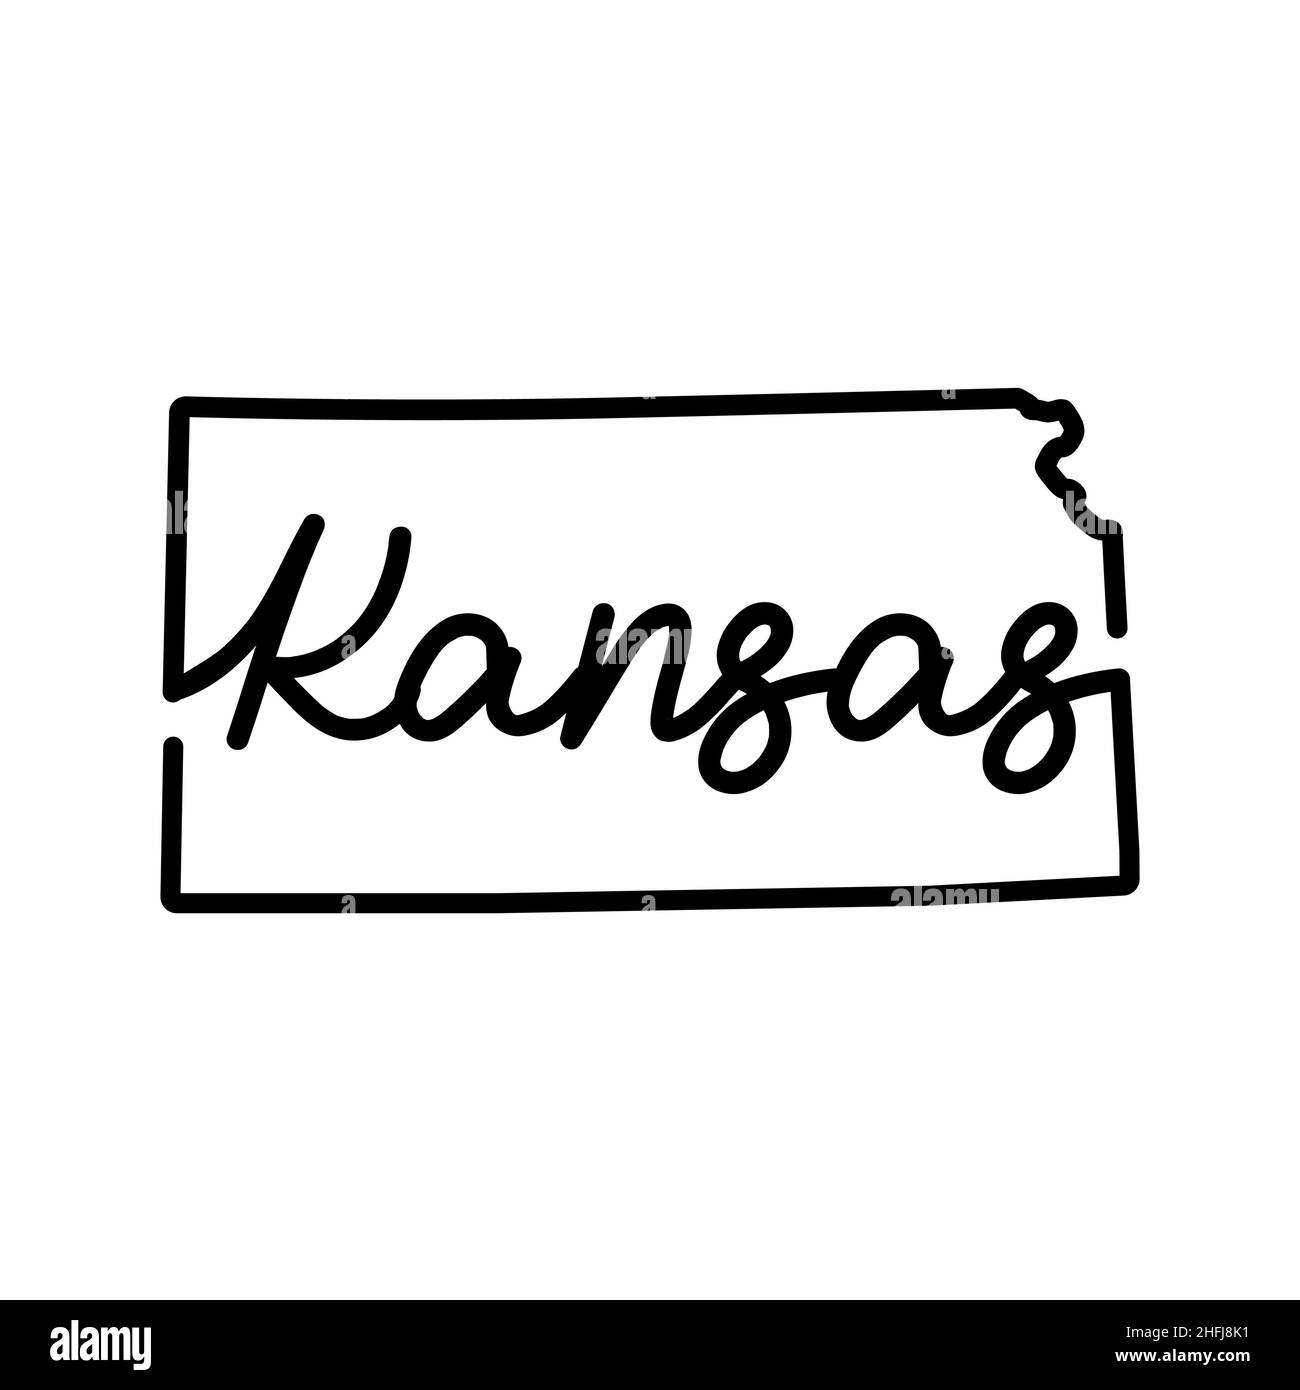 Kansas US state outline map with the handwritten state name ...